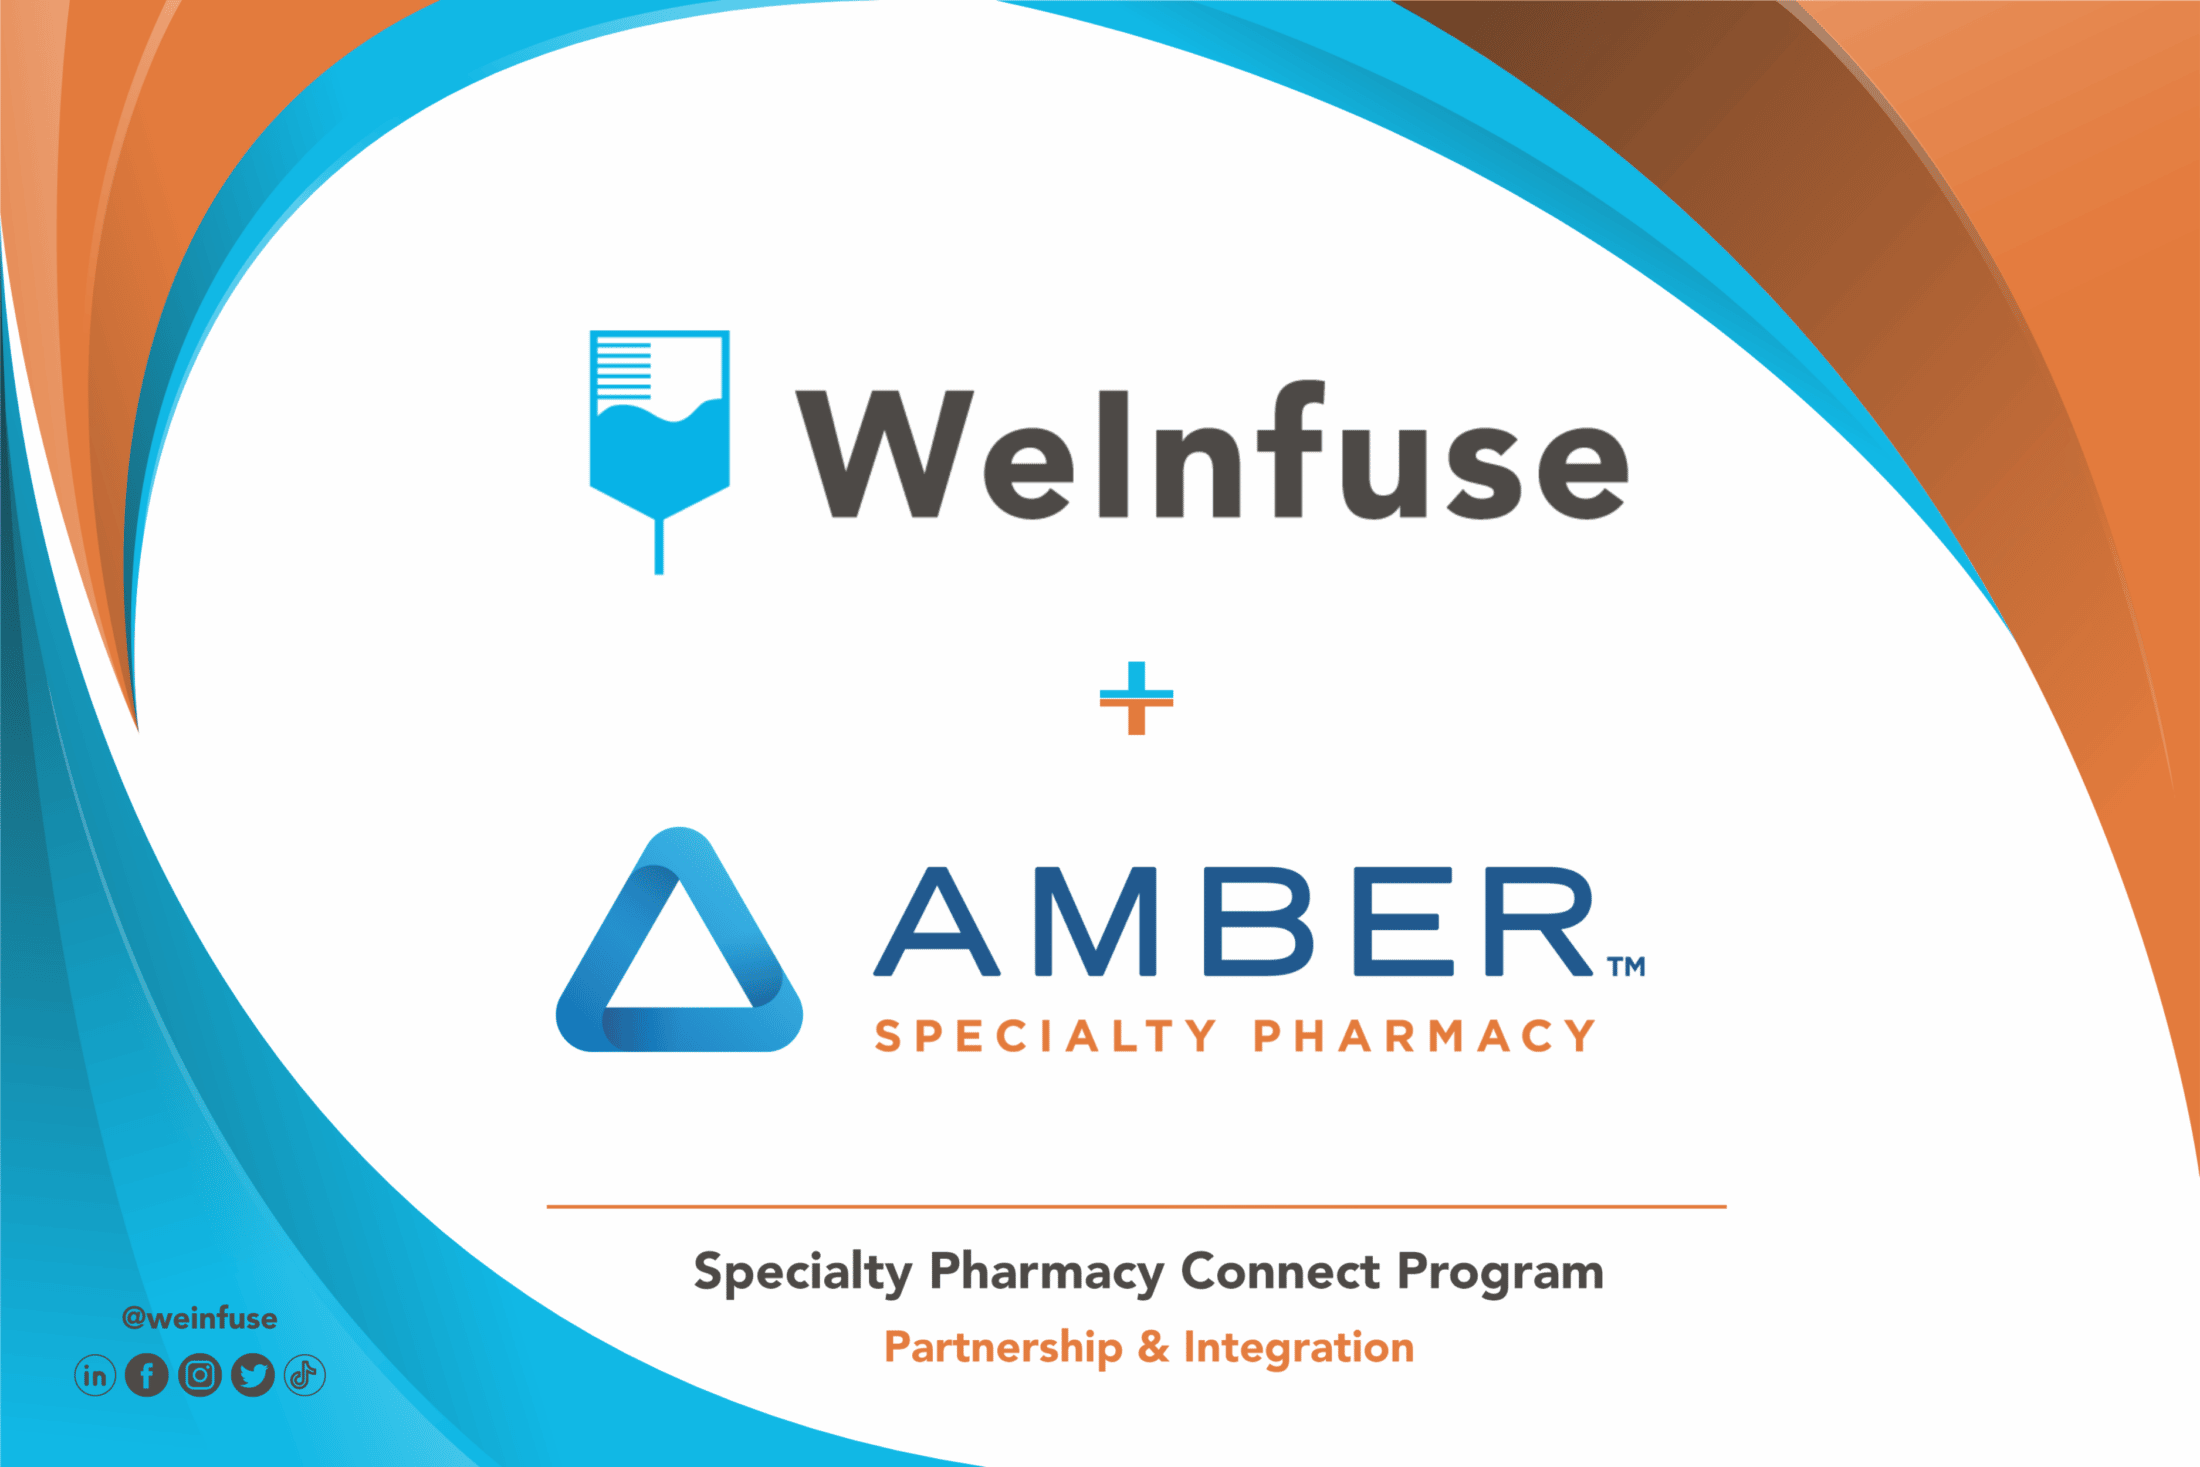 WeInfuse + Amber Specialty Pharmacy